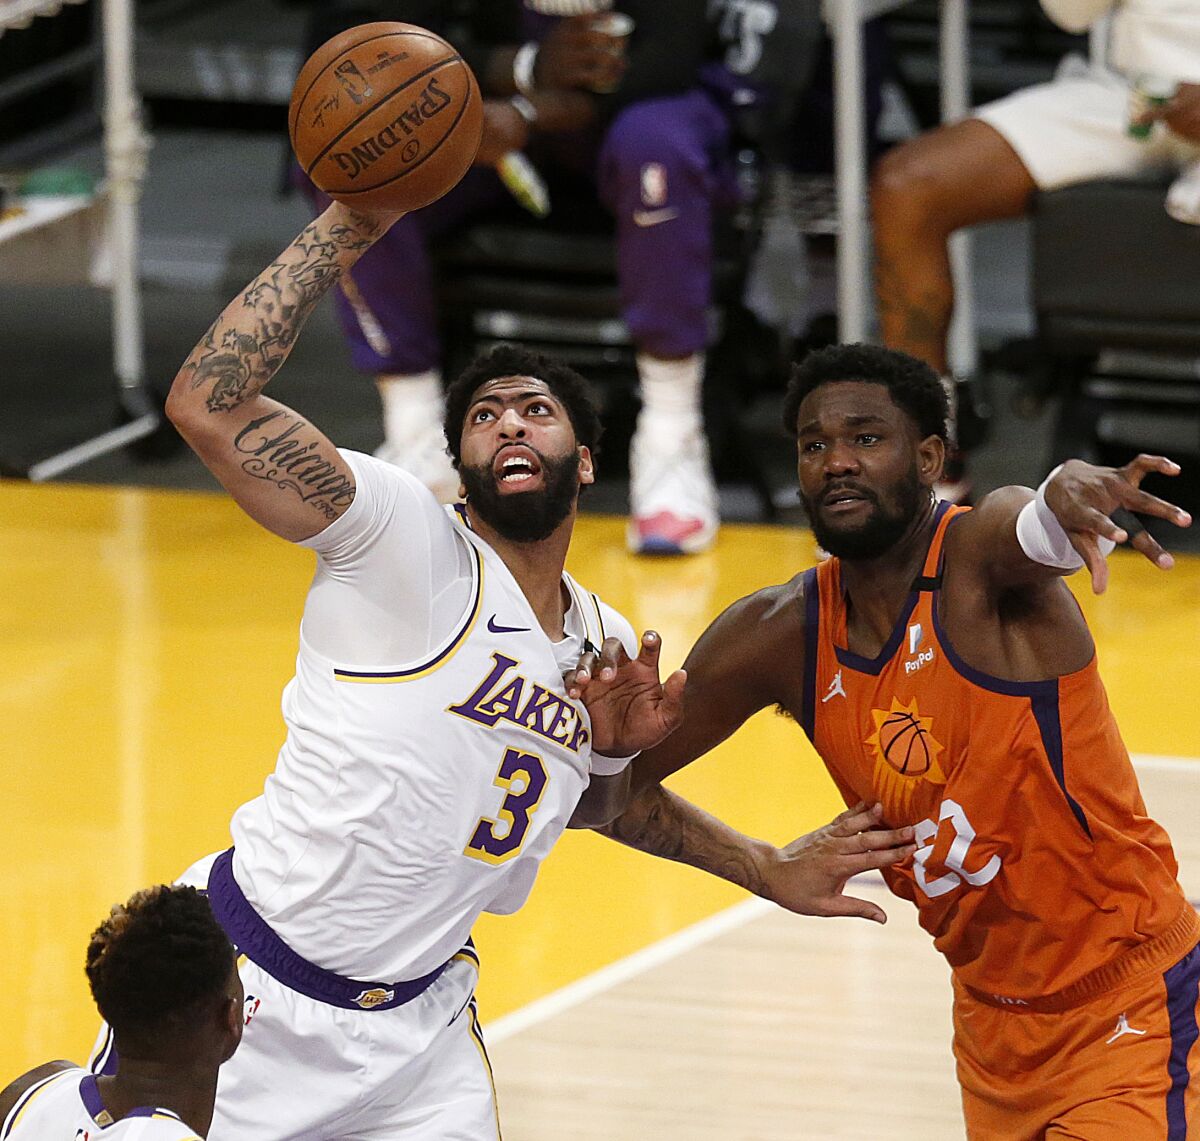 Lakers forward Anthony Davis intercepts a pass intended for Suns center Deandre Ayton during Game 4.